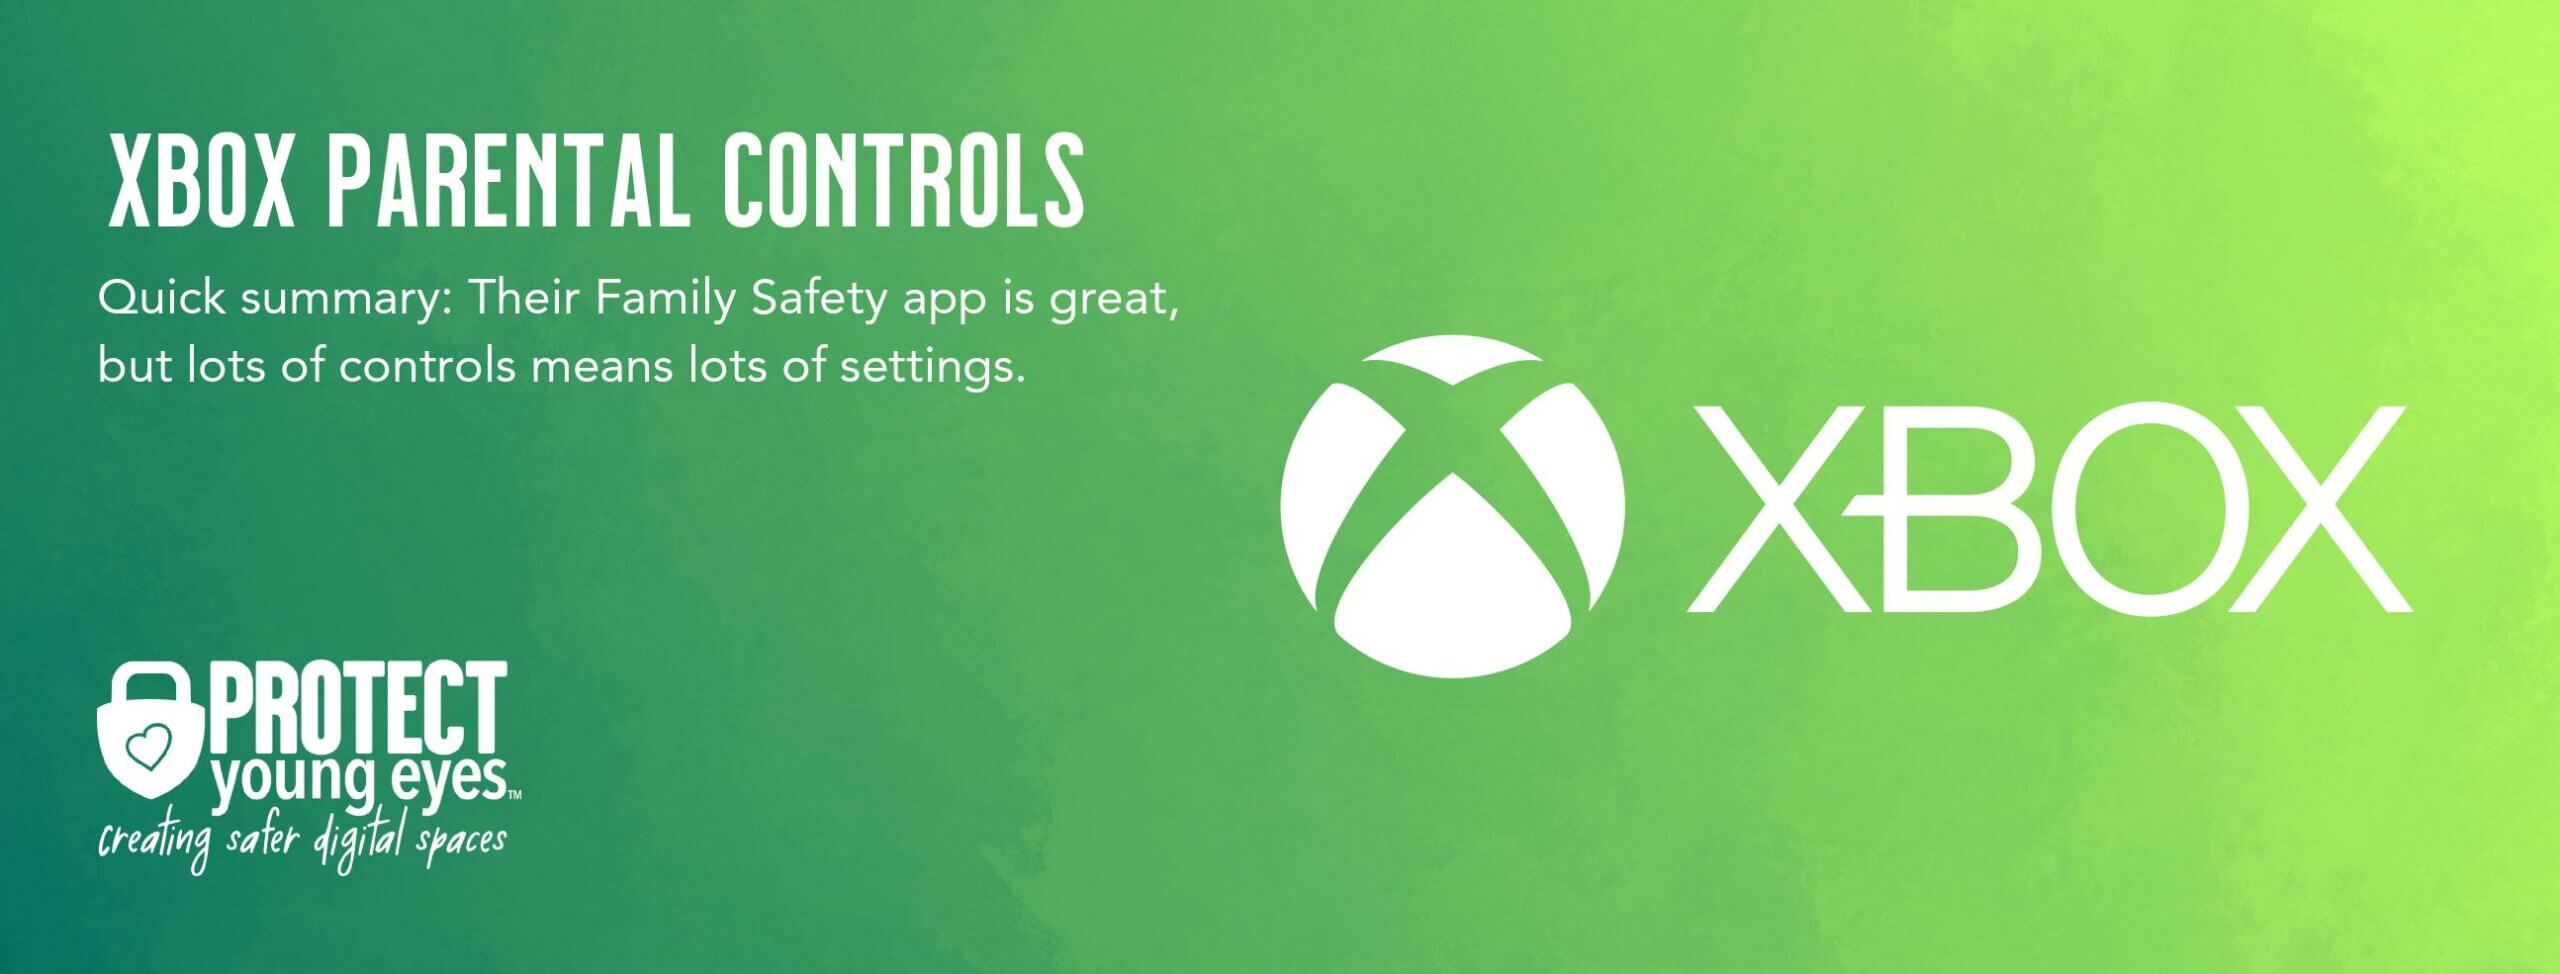 Www Xnox Com - Xbox Parental Controls Complete Guide - Protect Young Eyes